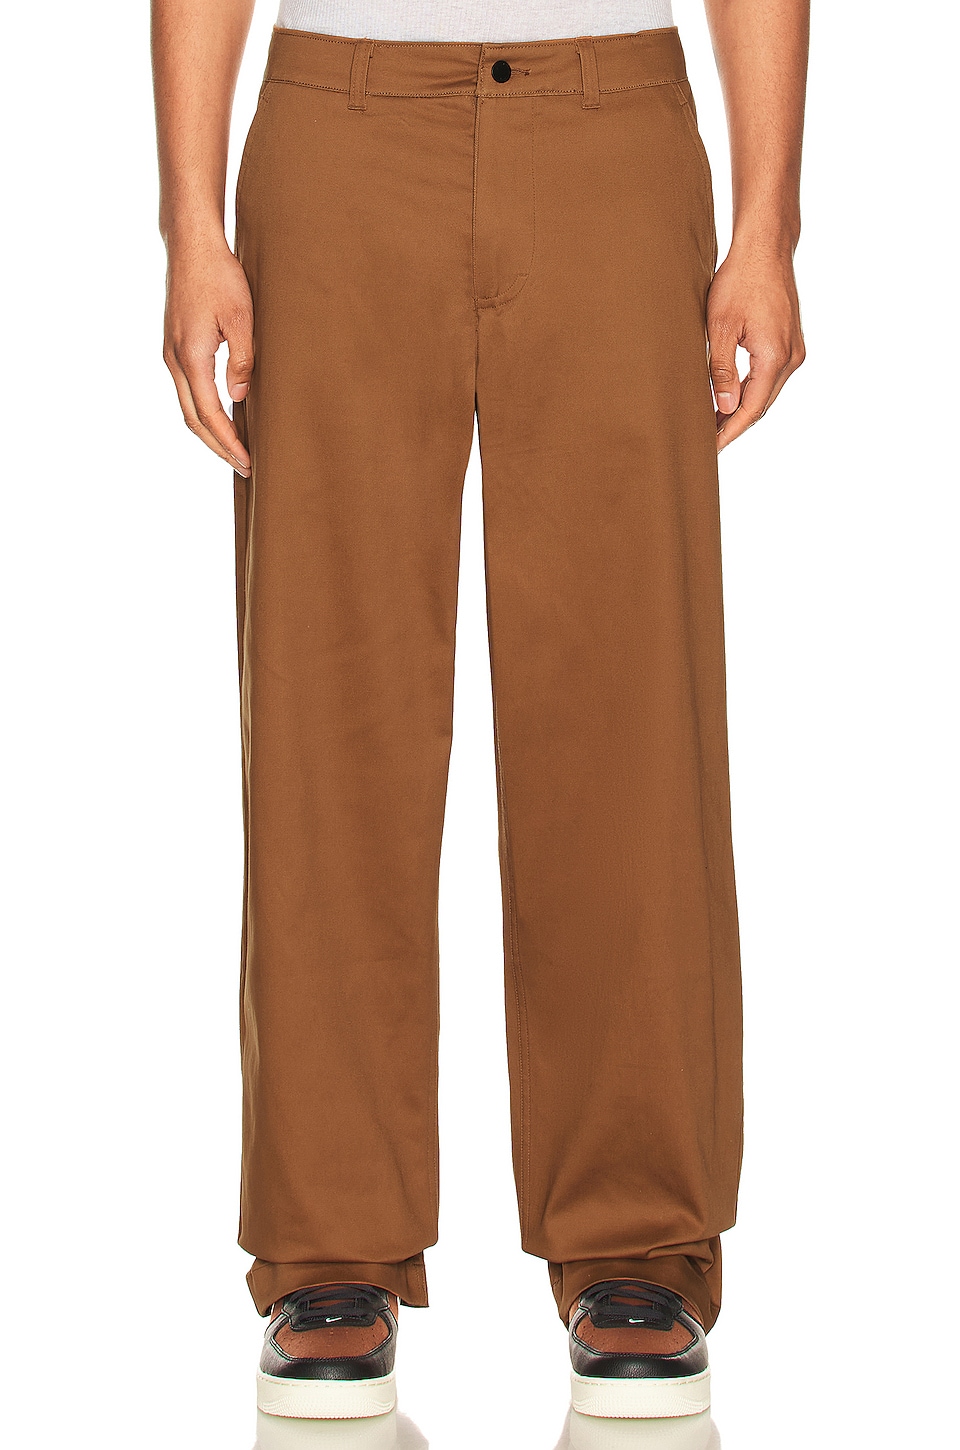 | Cotton Chino M in REVOLVE Nike Pant Ul Brown/White Nl El Ale